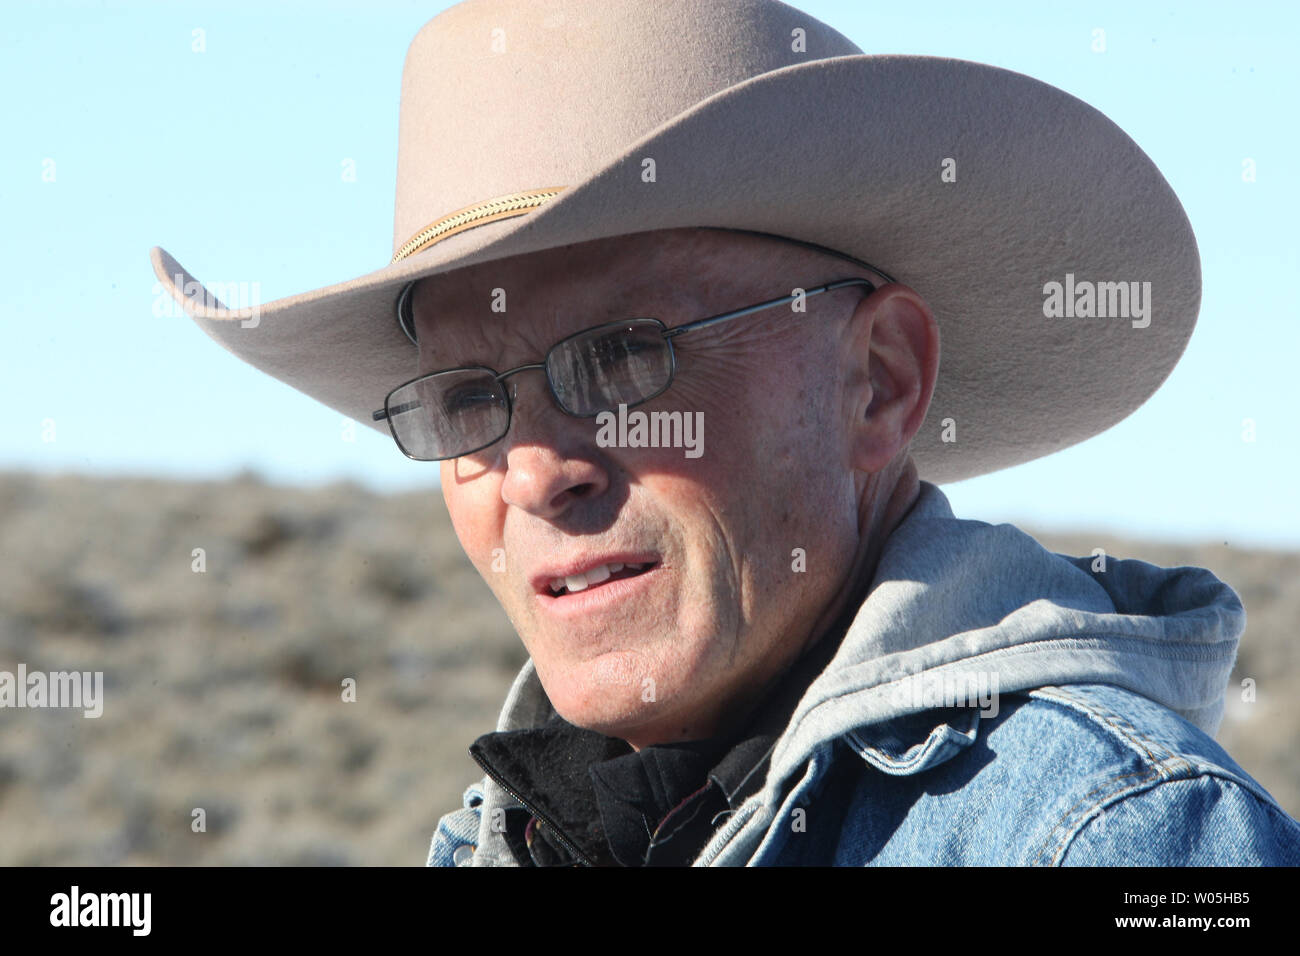 LaVoy Finicum, spokesman for the armed activists died after shots were fired when police stopped the group on Highway 395 as they headed to a public meeting January 27, 2016 near Burns, OR. Five of his cohorts, including Ammon and Ryan Bundy, the 40 and 43-year-old brothers leading the occupation were arrested at the scene. Ammon Bundy and about 20 other protesters took over the refuge on Jan. 2 after a rally to support the imprisoned local ranchers Dwight Hammond Jr., and his son, Steven Hammond.      Photo by Jim Bryant/UPI Stock Photo